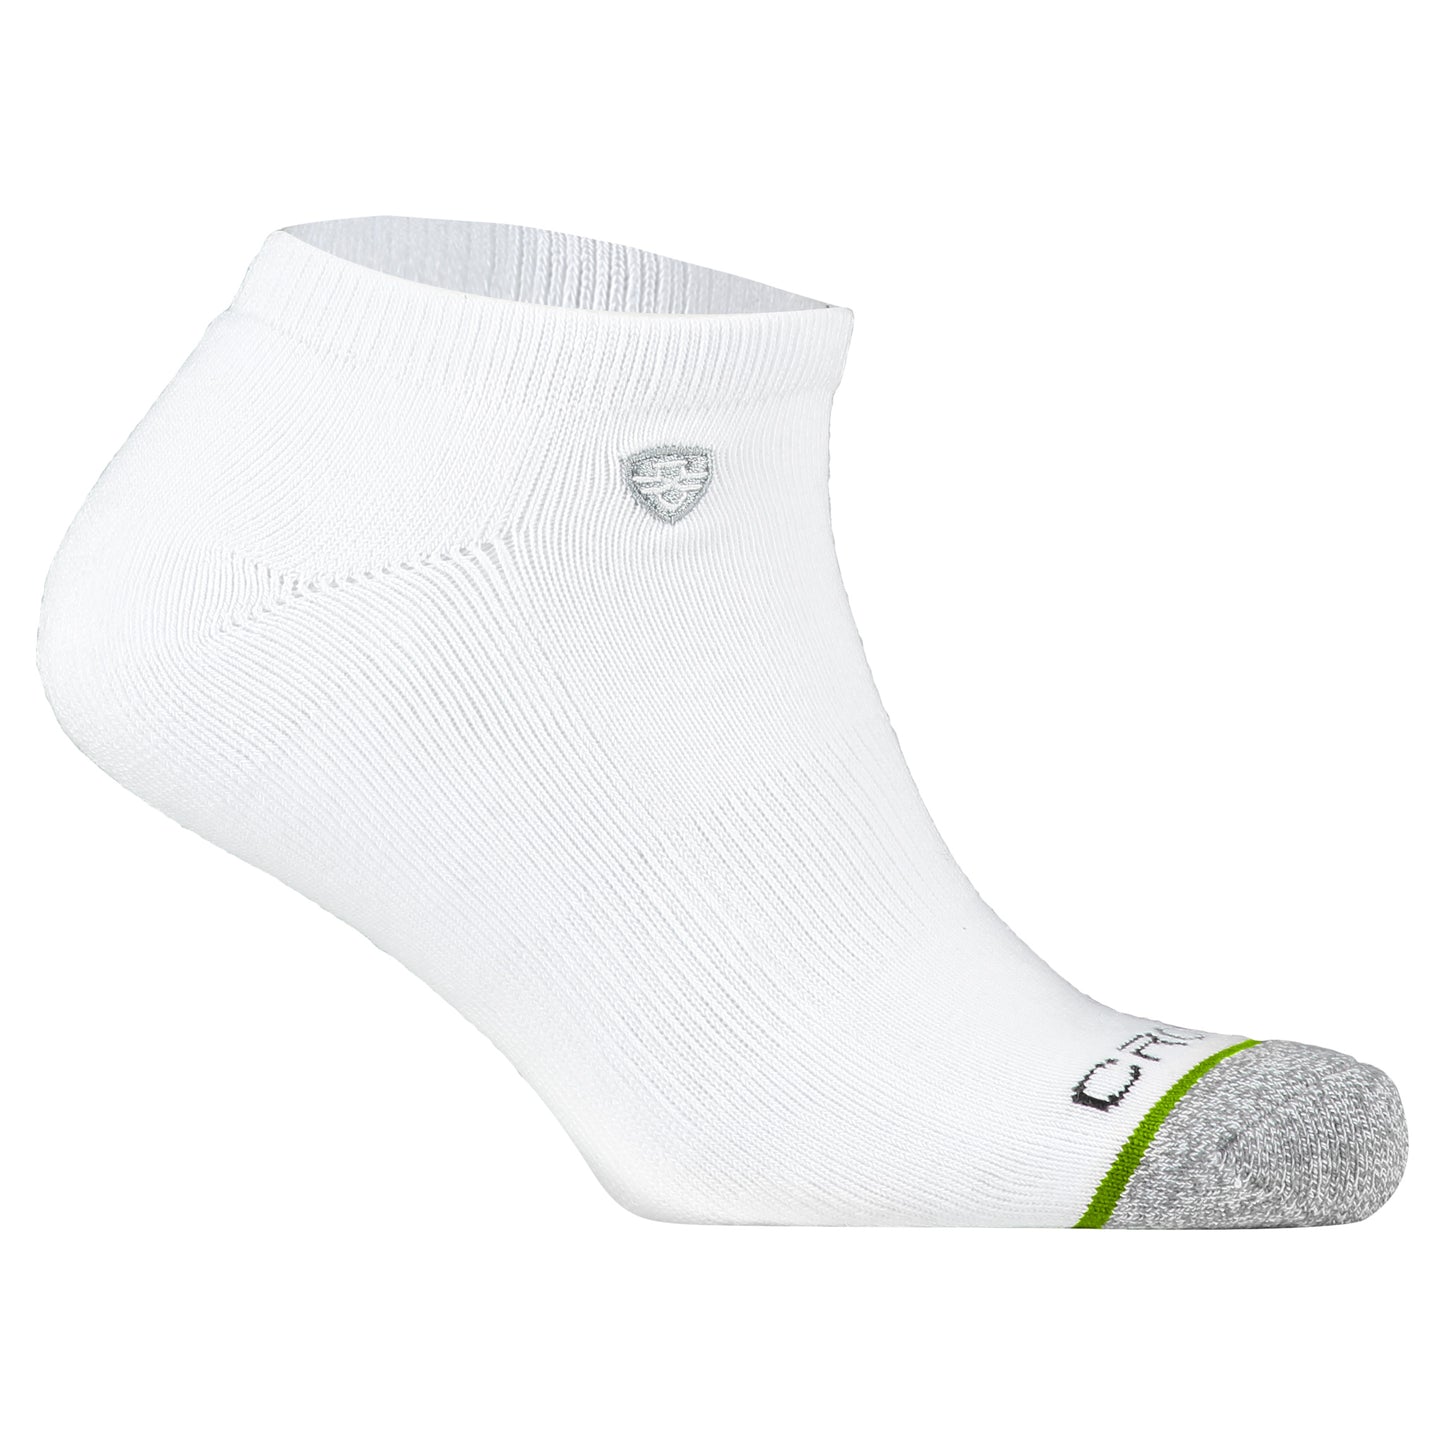 Crossfly men's Original Low Socks in white from the Everyday series, featuring Flat Toe Seams and 360 Hold.